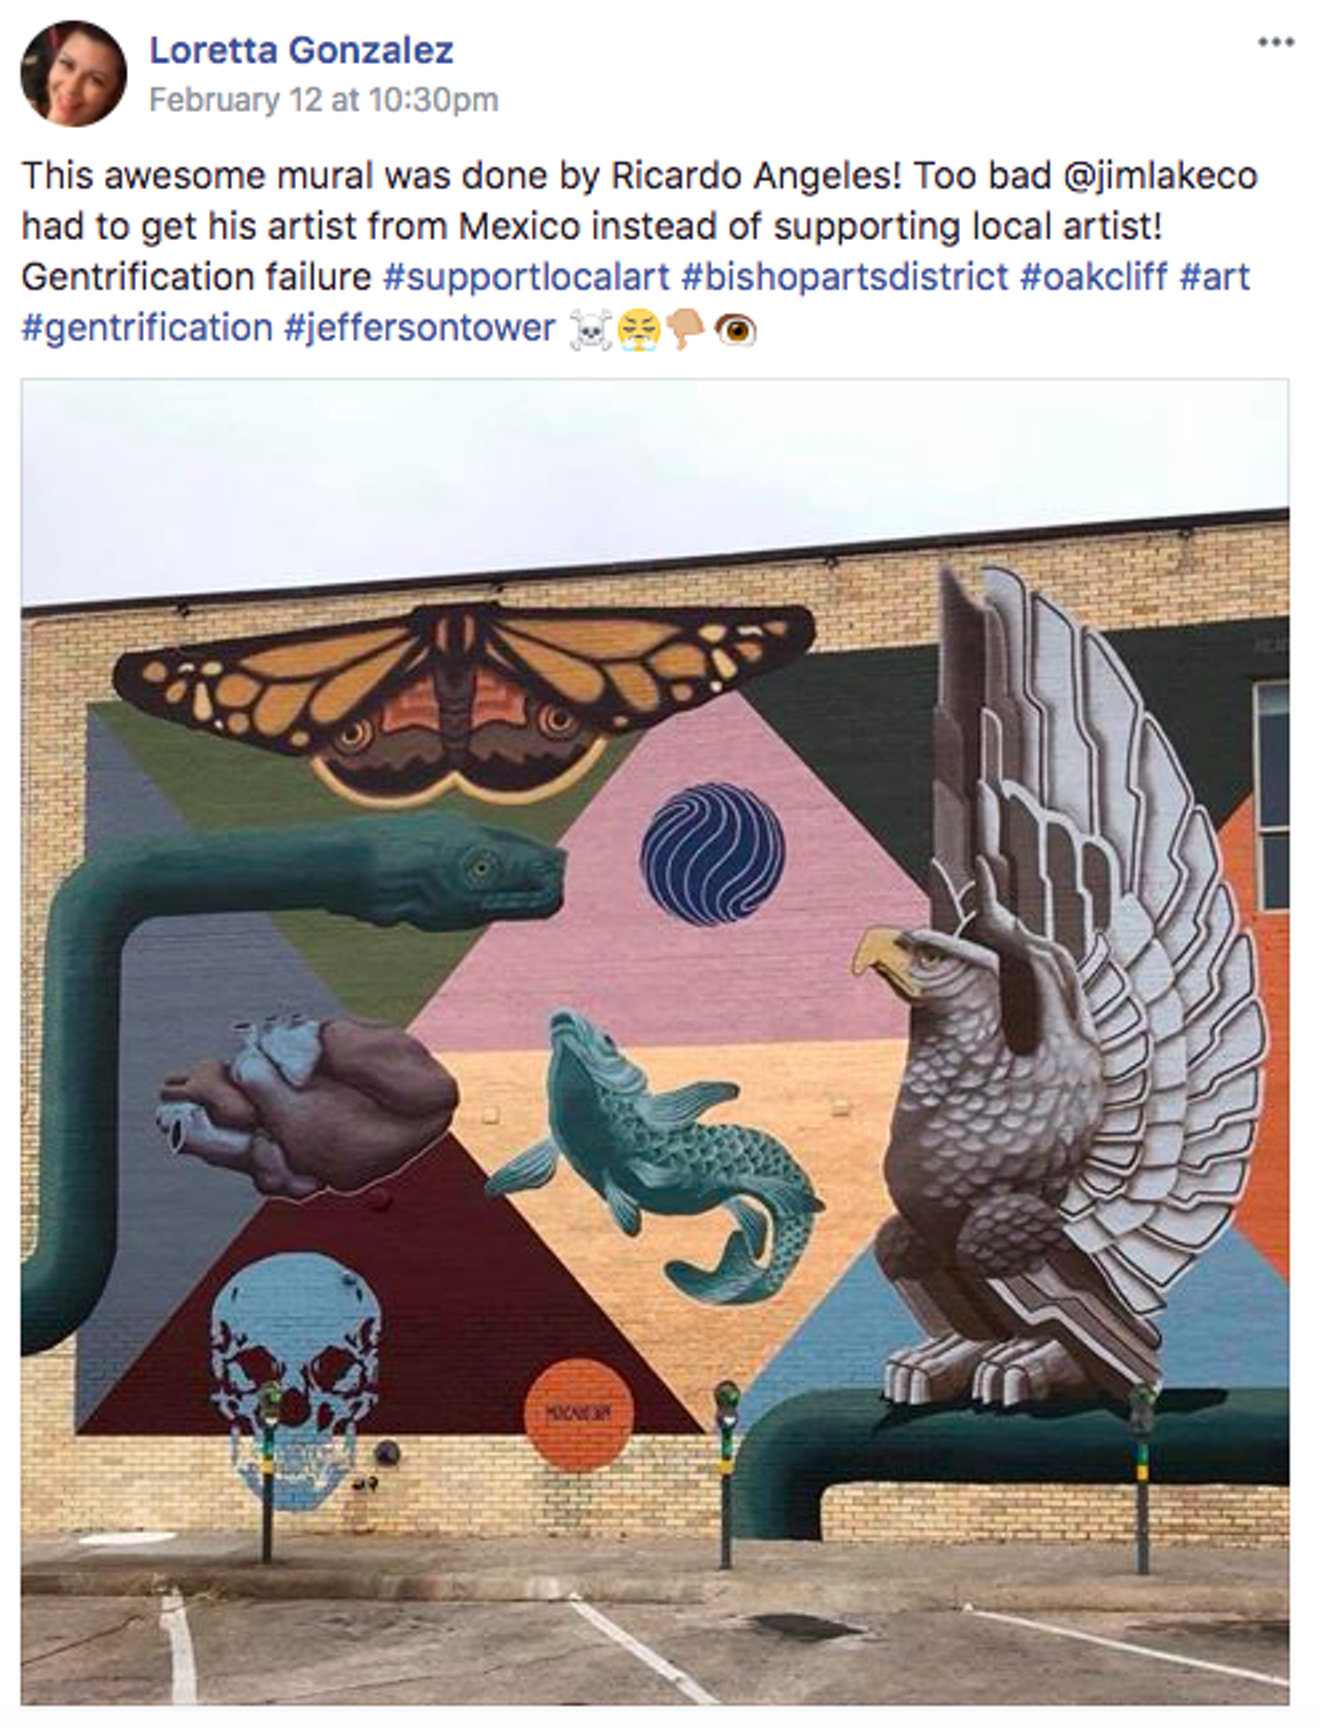 Are you offended a nonlocal artist designed this mural?